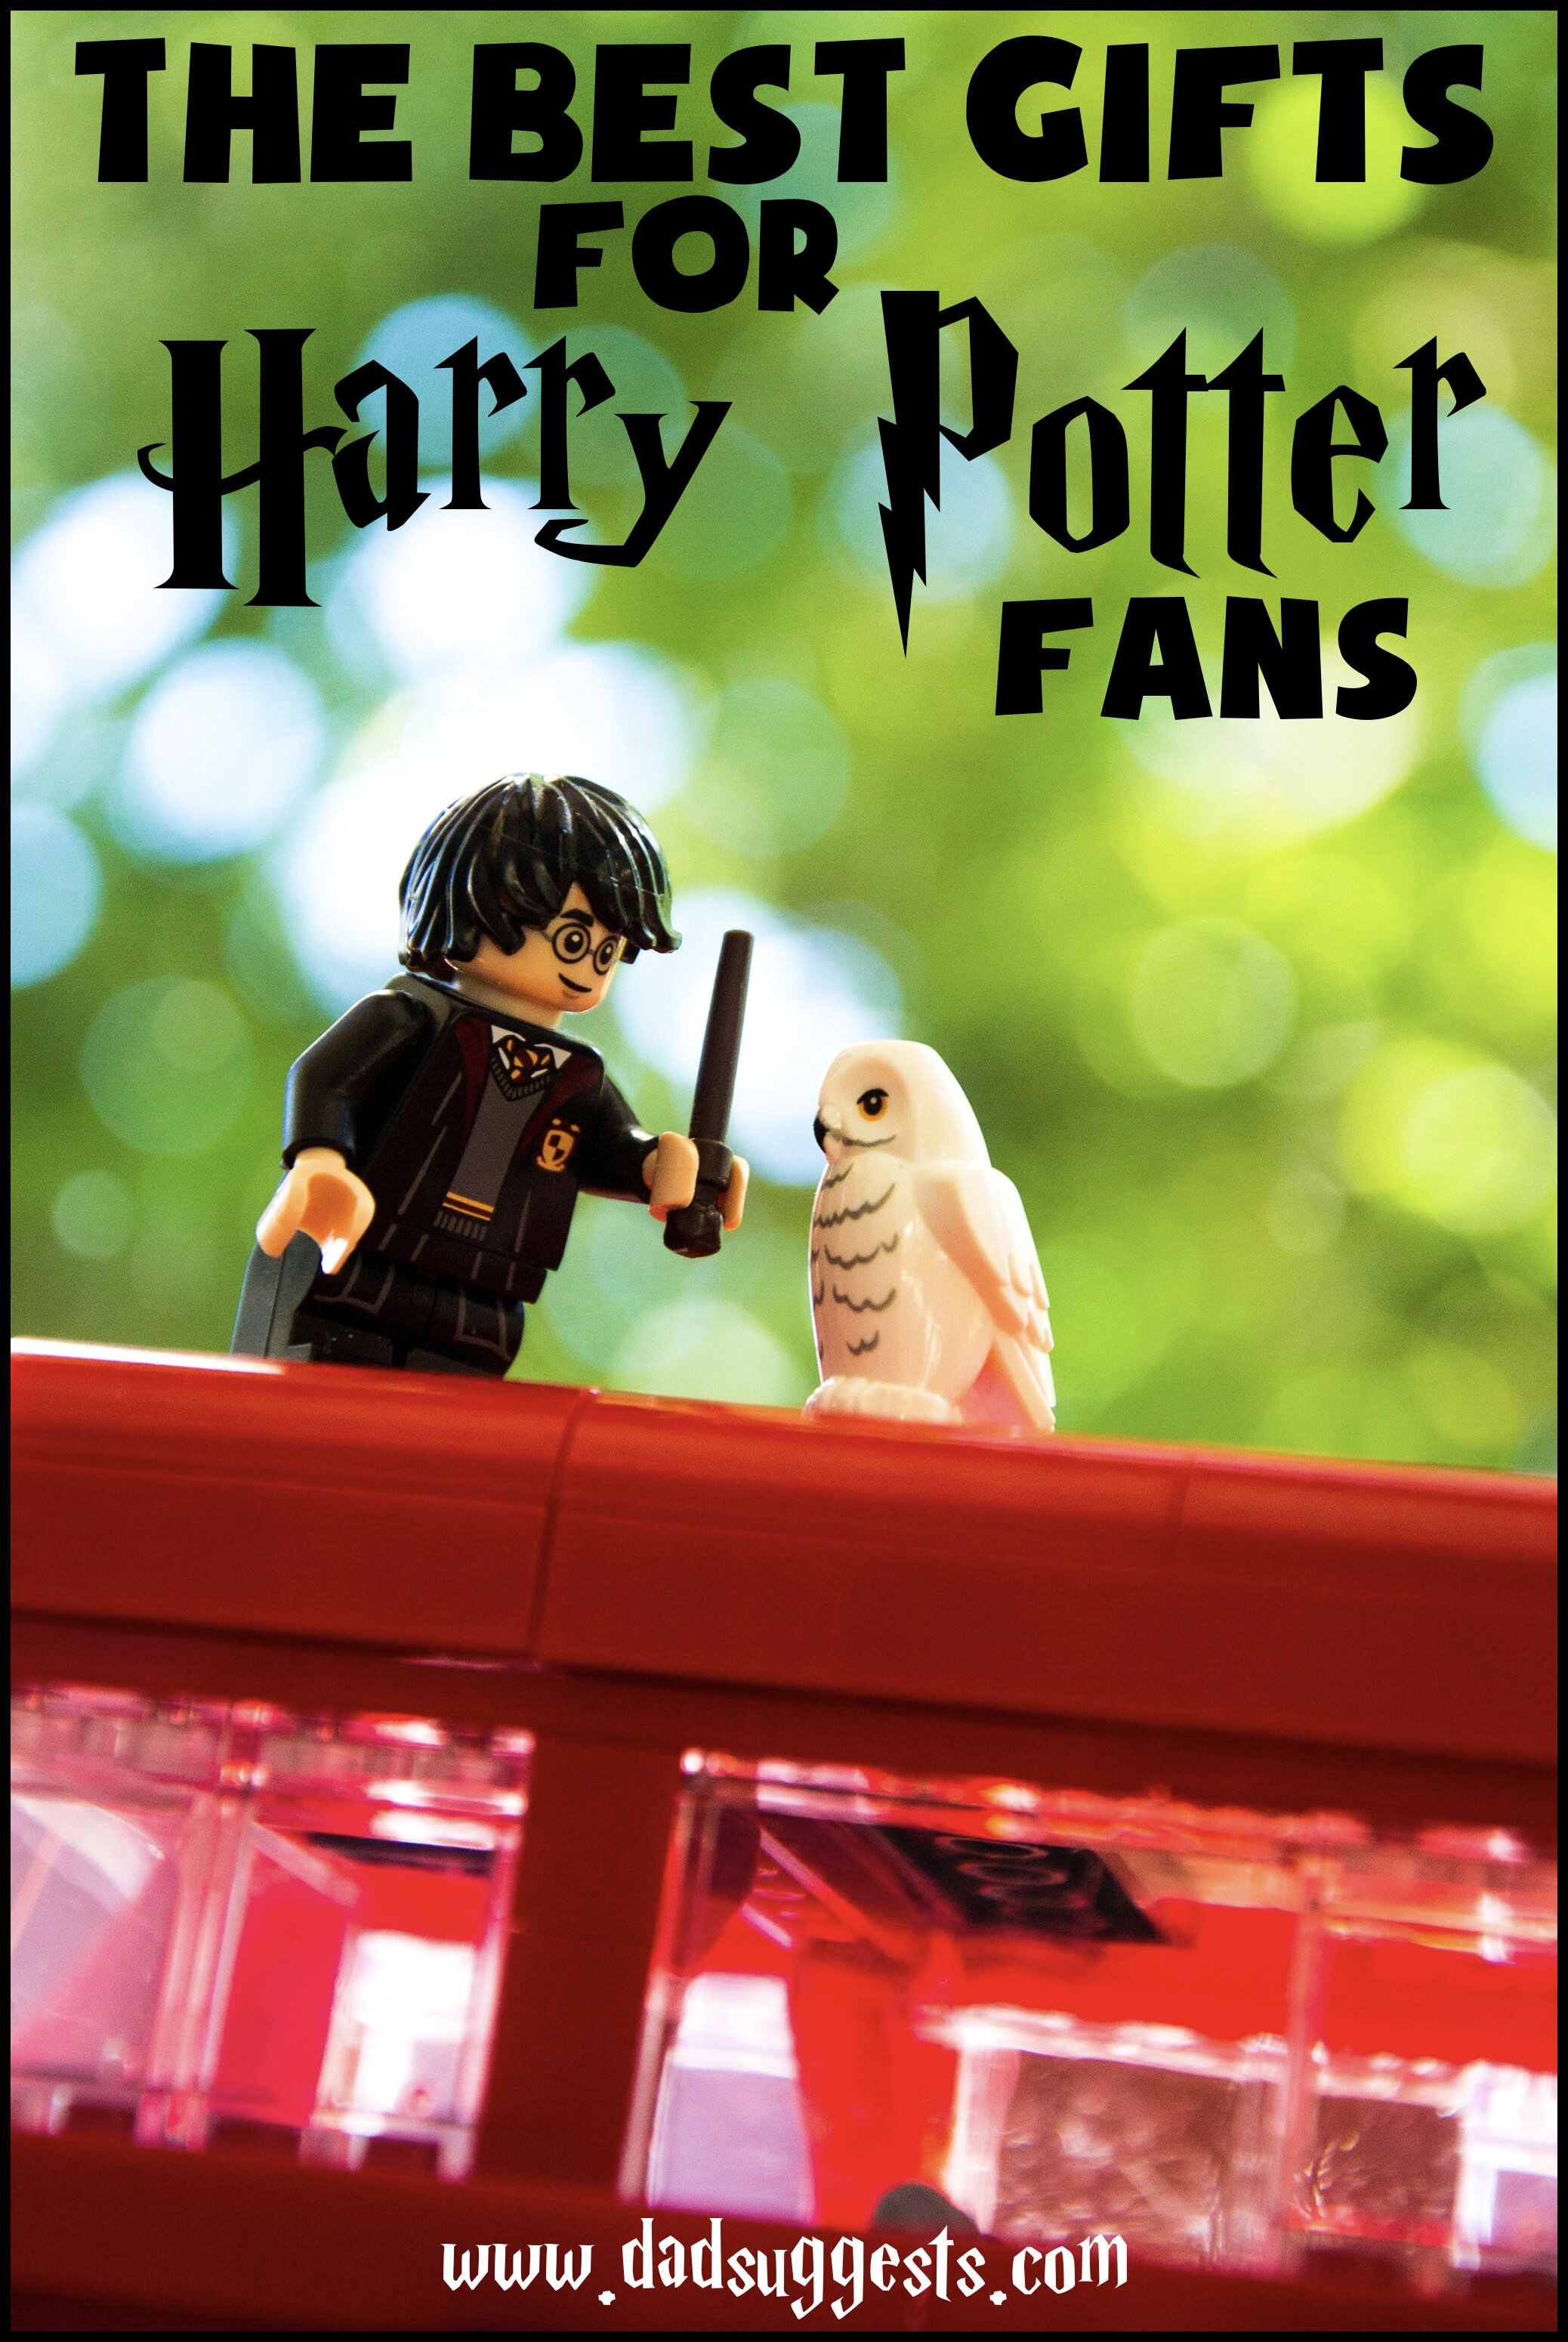 36 of the BEST Harry Potter Gifts for Wizarding Kids! - Thrifty Nifty Mommy